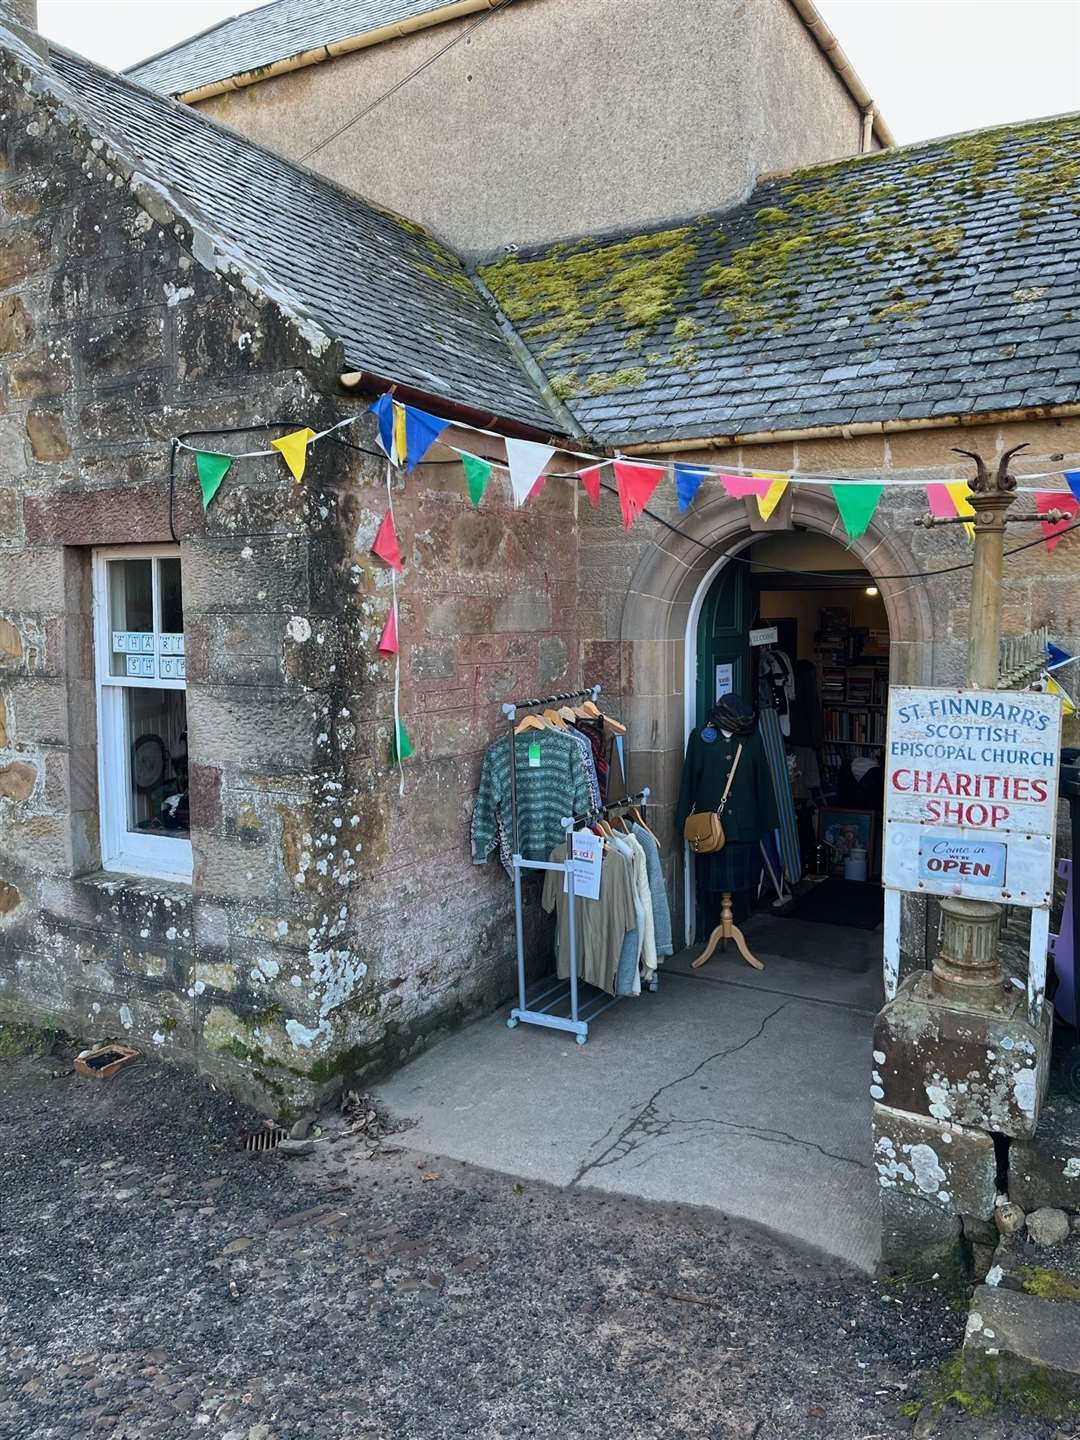 St Finnbarr's Scottish Episcopal Church Charity Shop has raised more than £200,000 over the past 40 years.